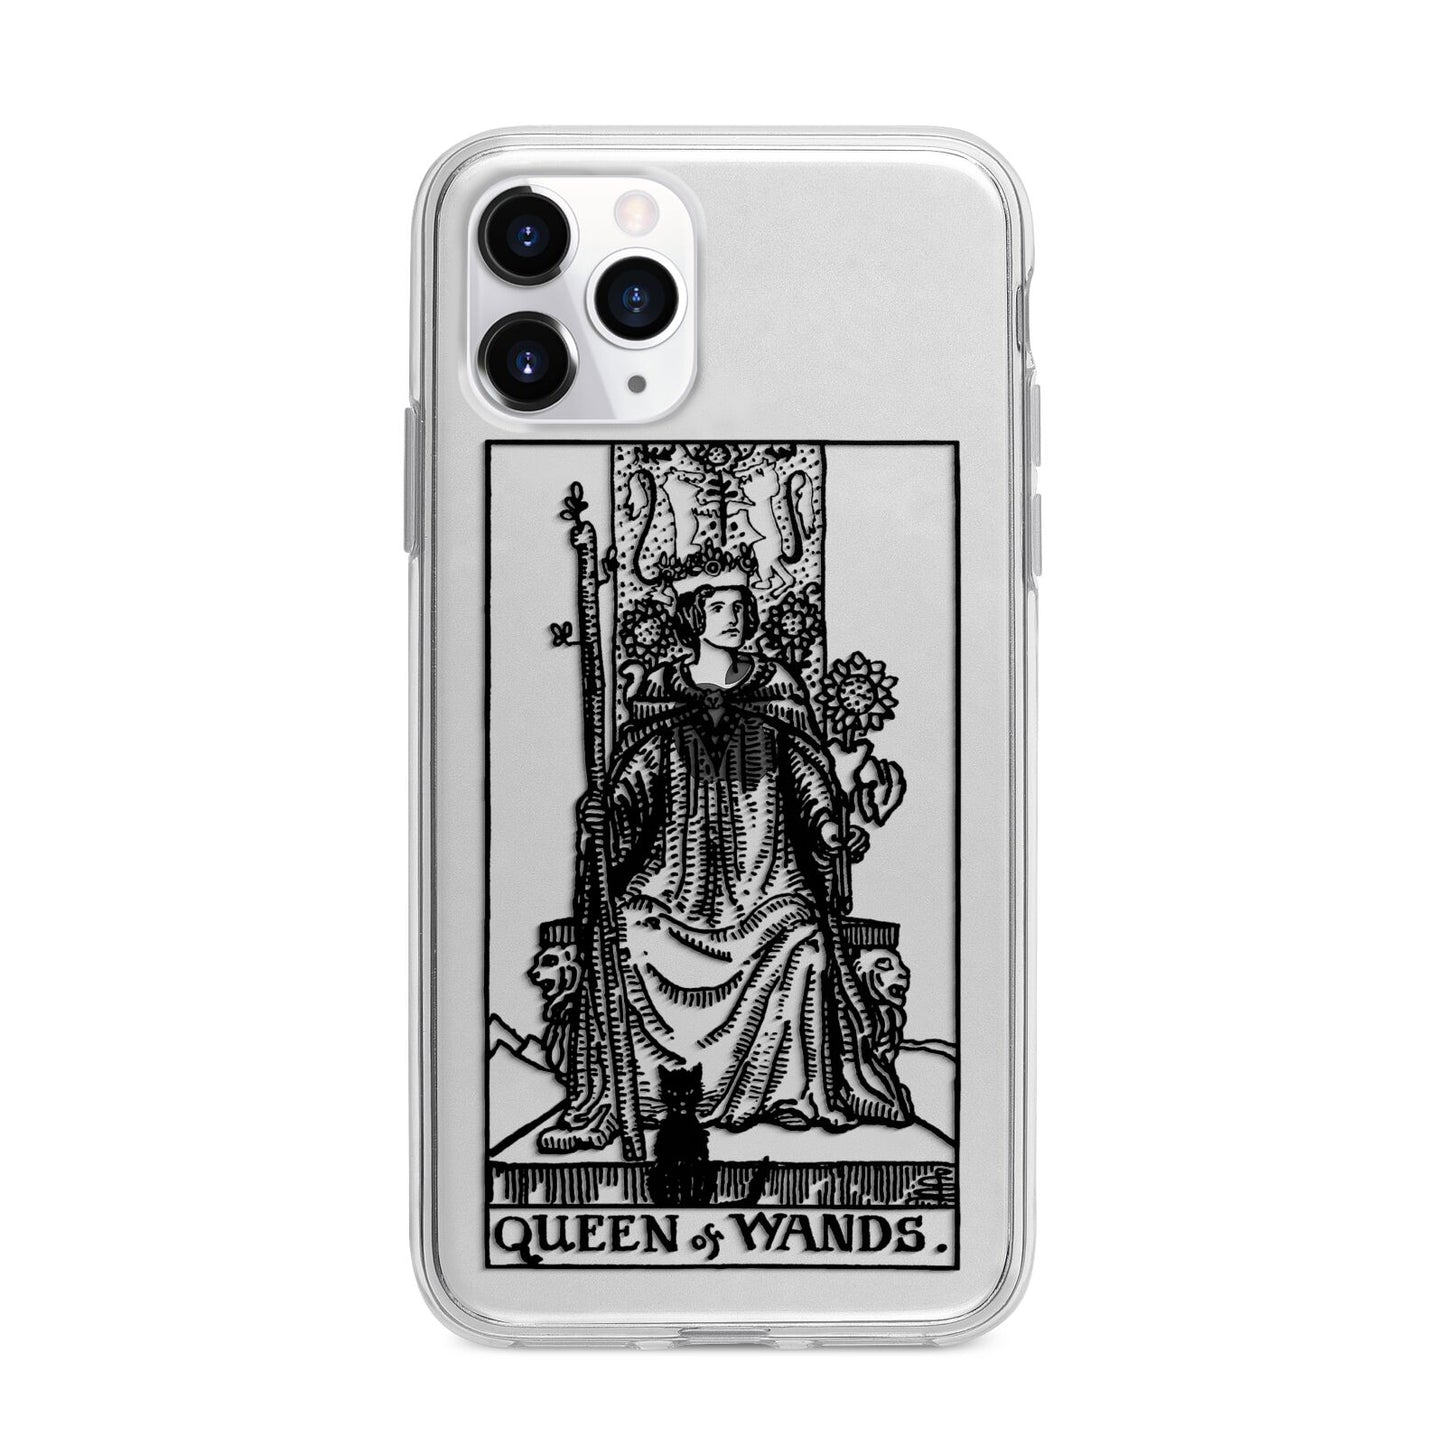 Queen of Wands Monochrome Apple iPhone 11 Pro in Silver with Bumper Case